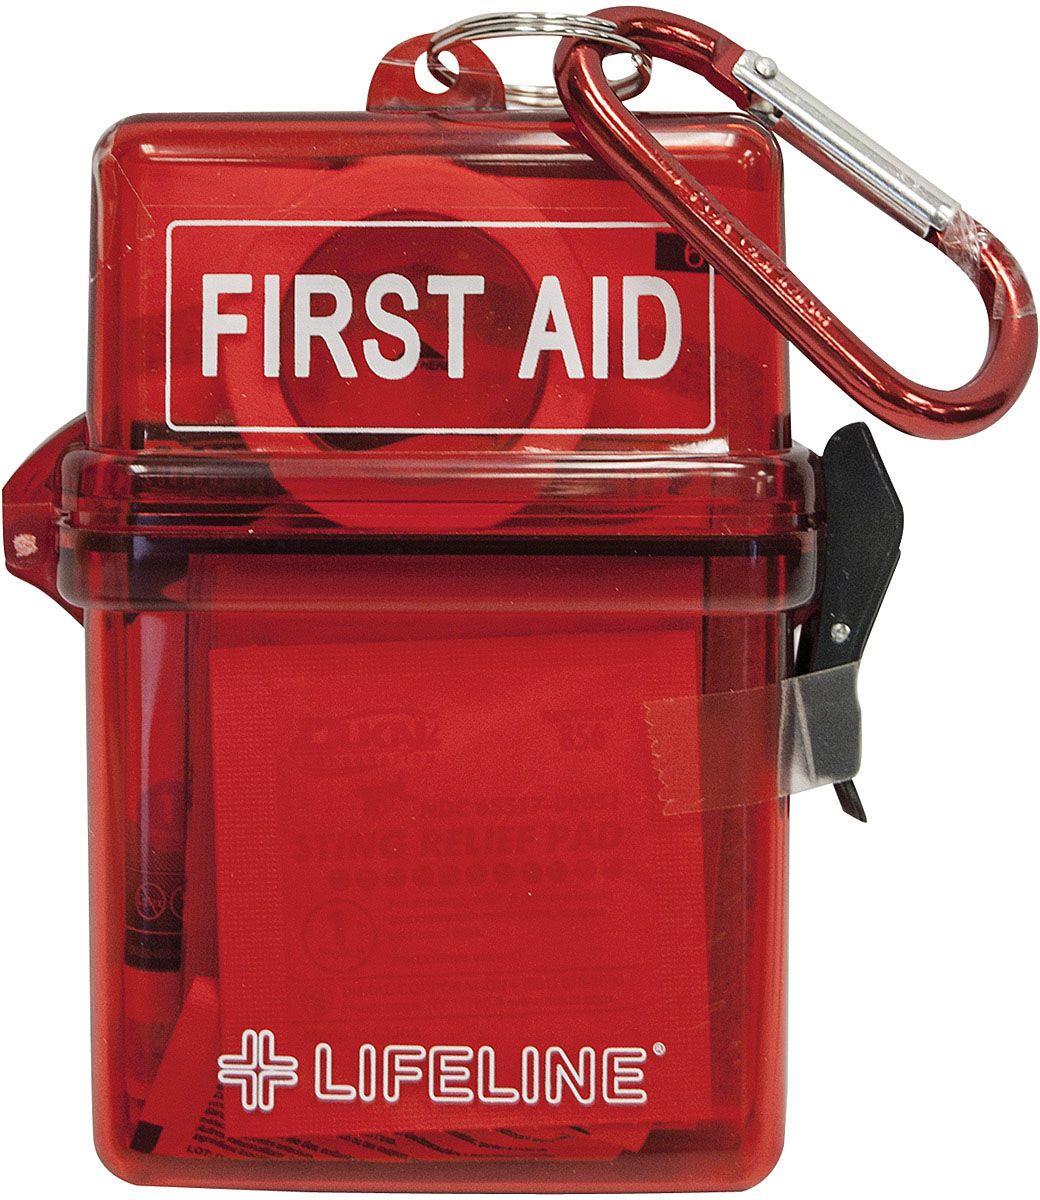 Lifeline | First Aid Kit - Weather Resistant, First Aid, Lifeline, Defiance Outdoor Gear Co.